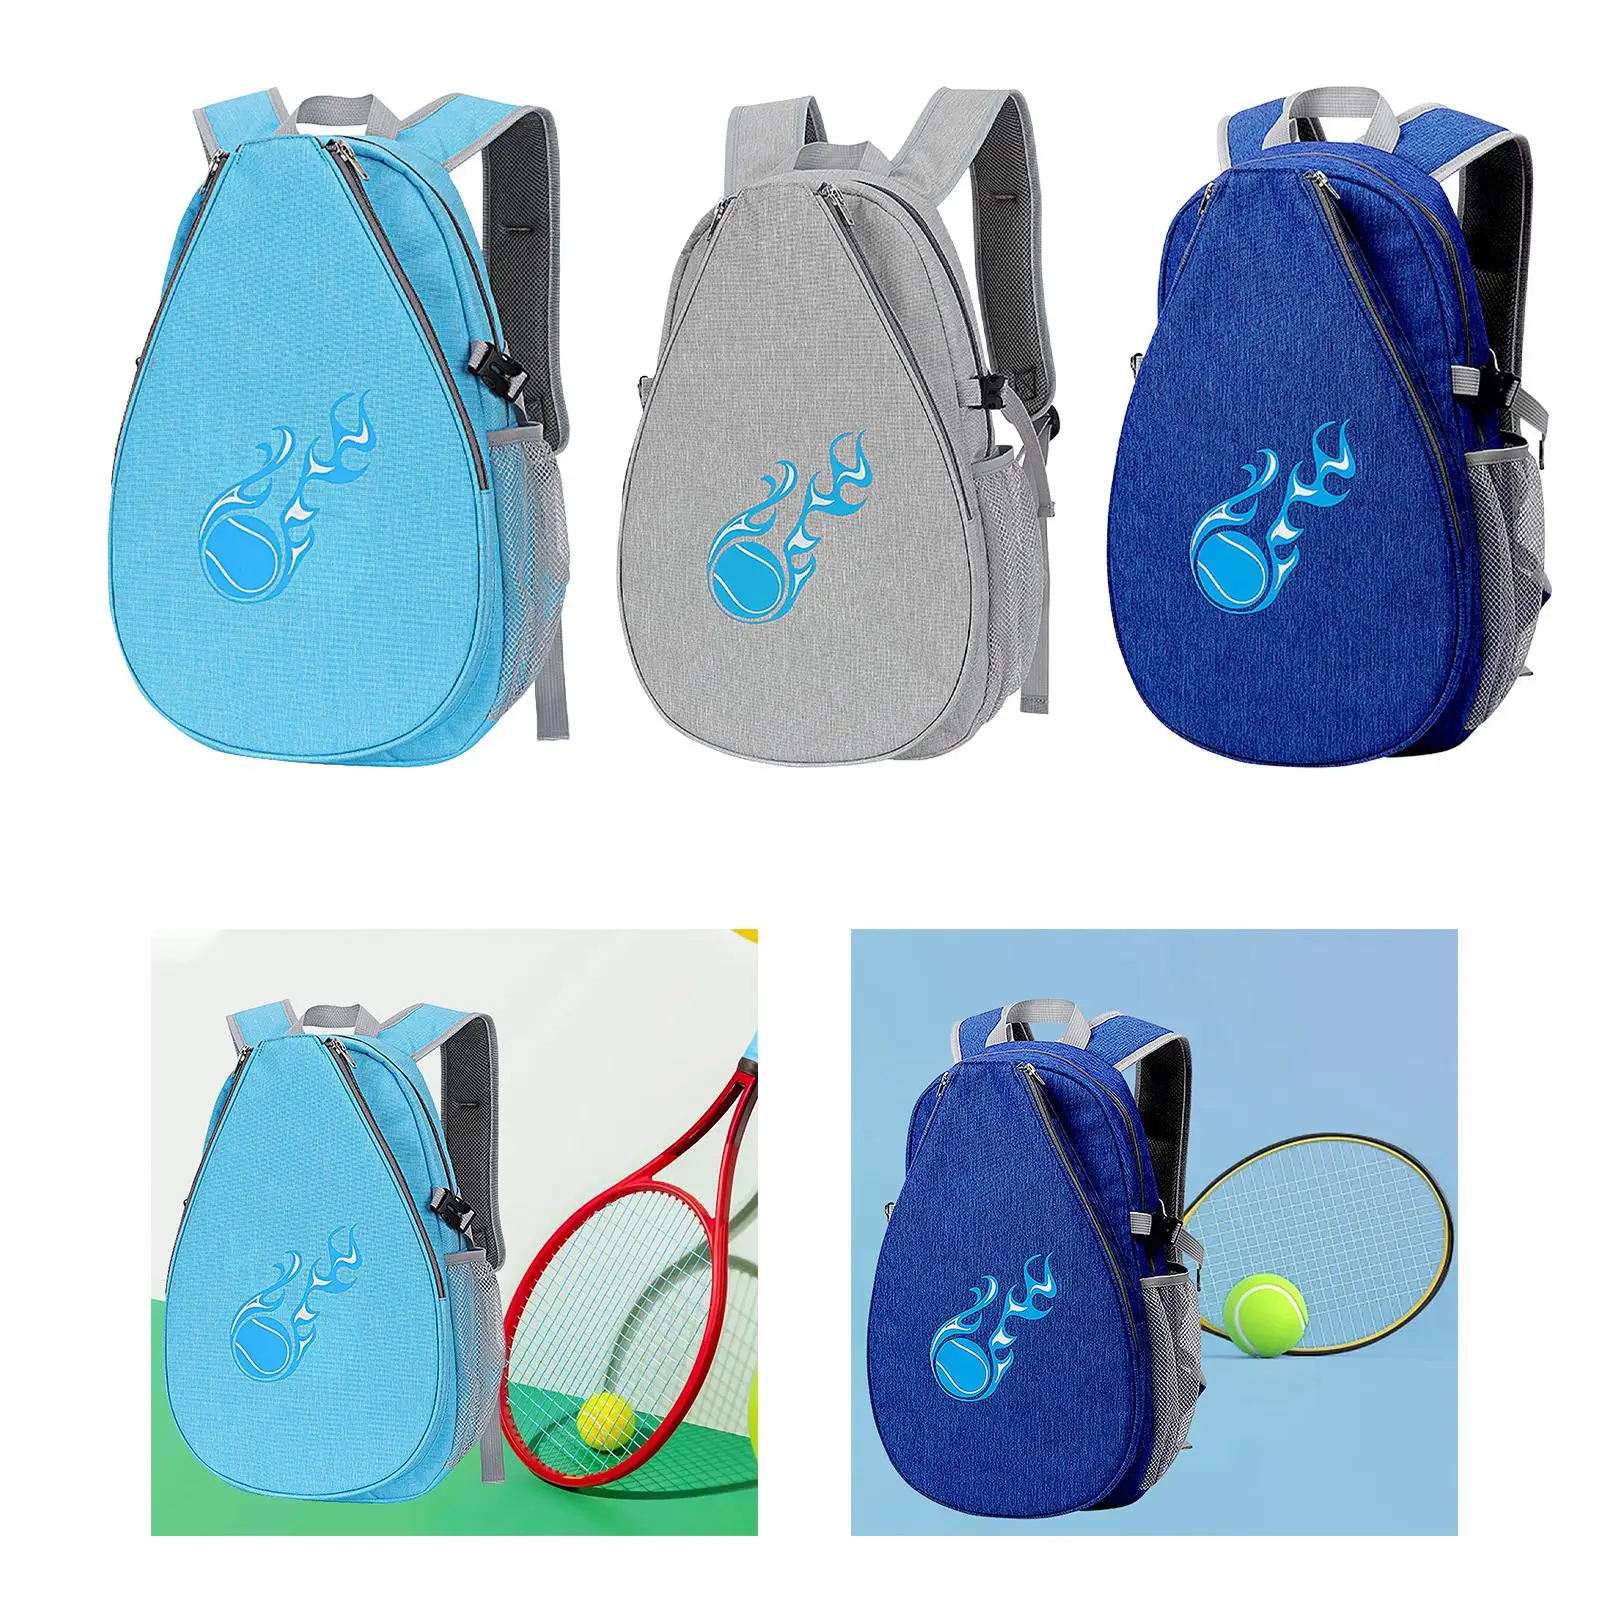 Tennis Bag Racquet Carrying Bag Multifunctional Sport Bag Large Tennis Backpack for Tennis Racket, Balls, and Other Accessories